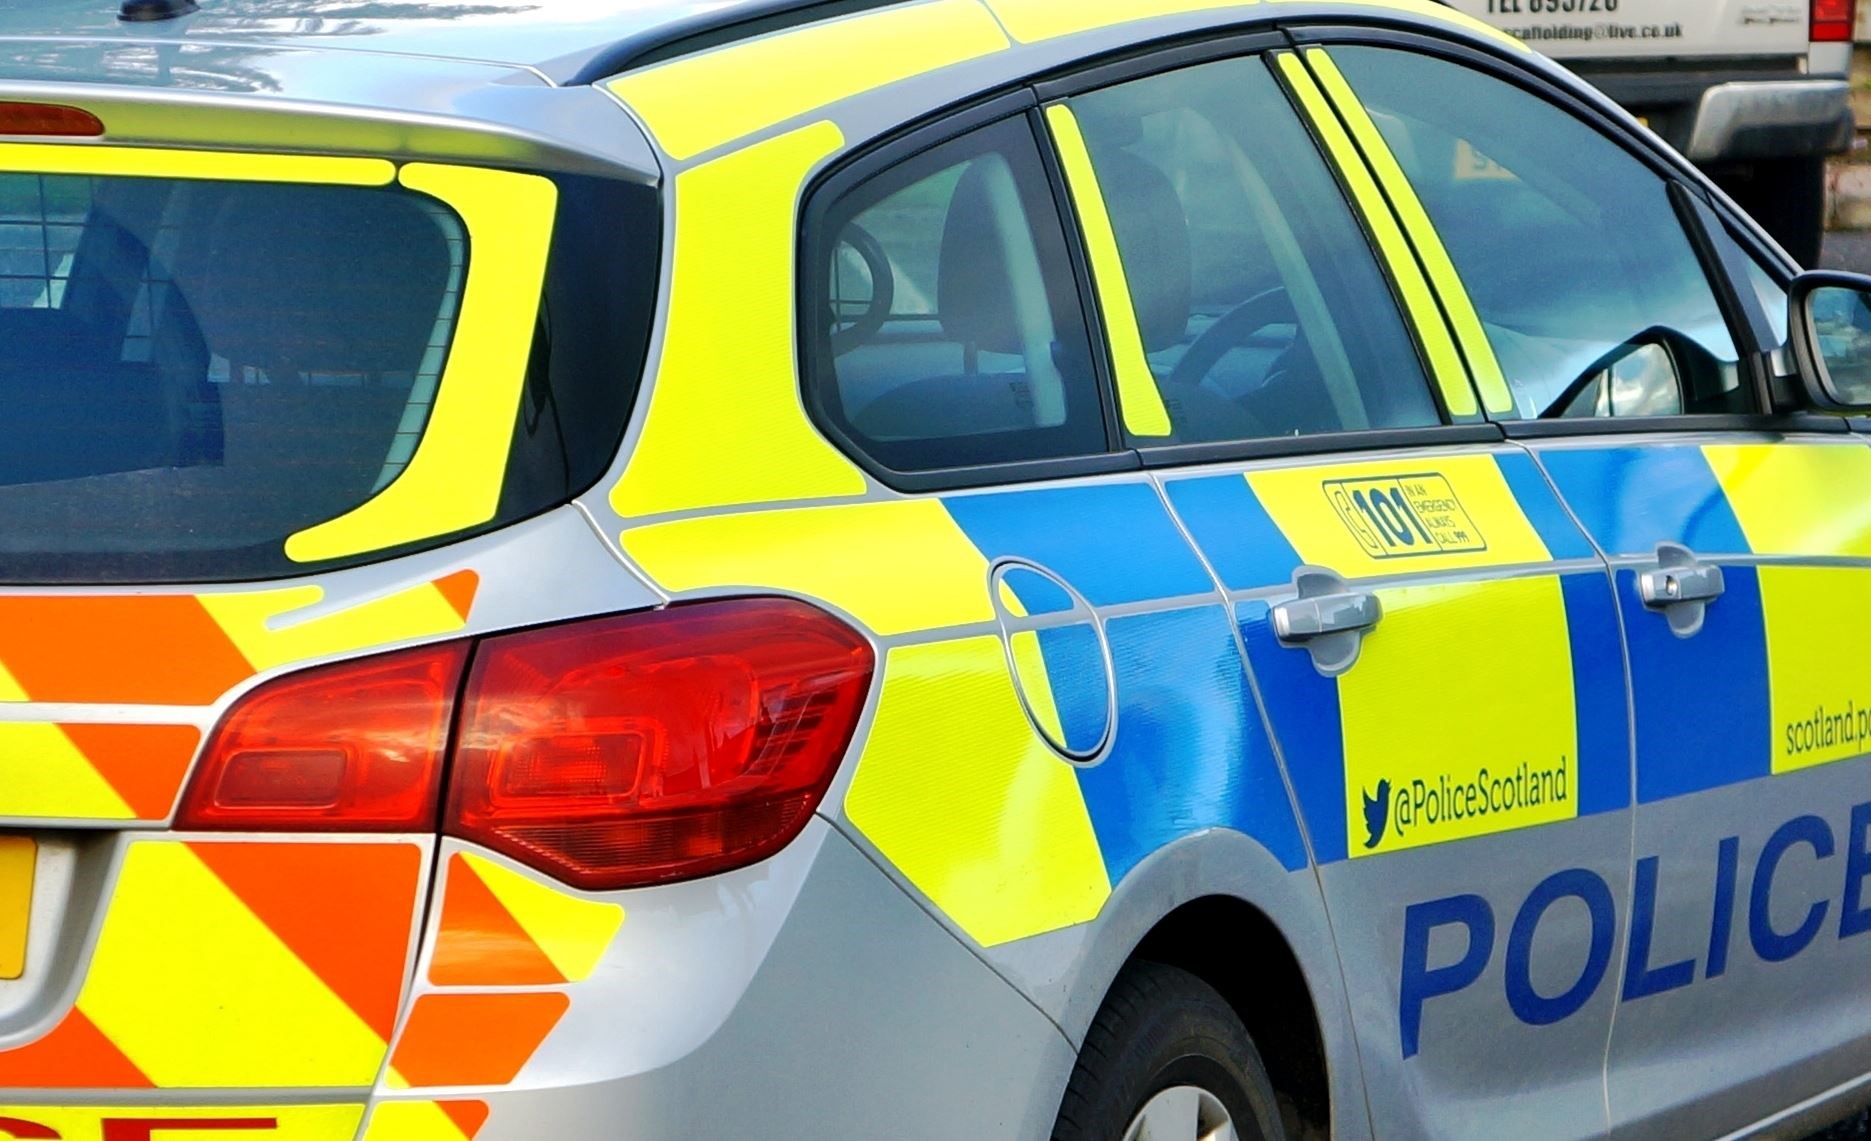 Police Scotland charged 20 motorists in Moray over the weekend.